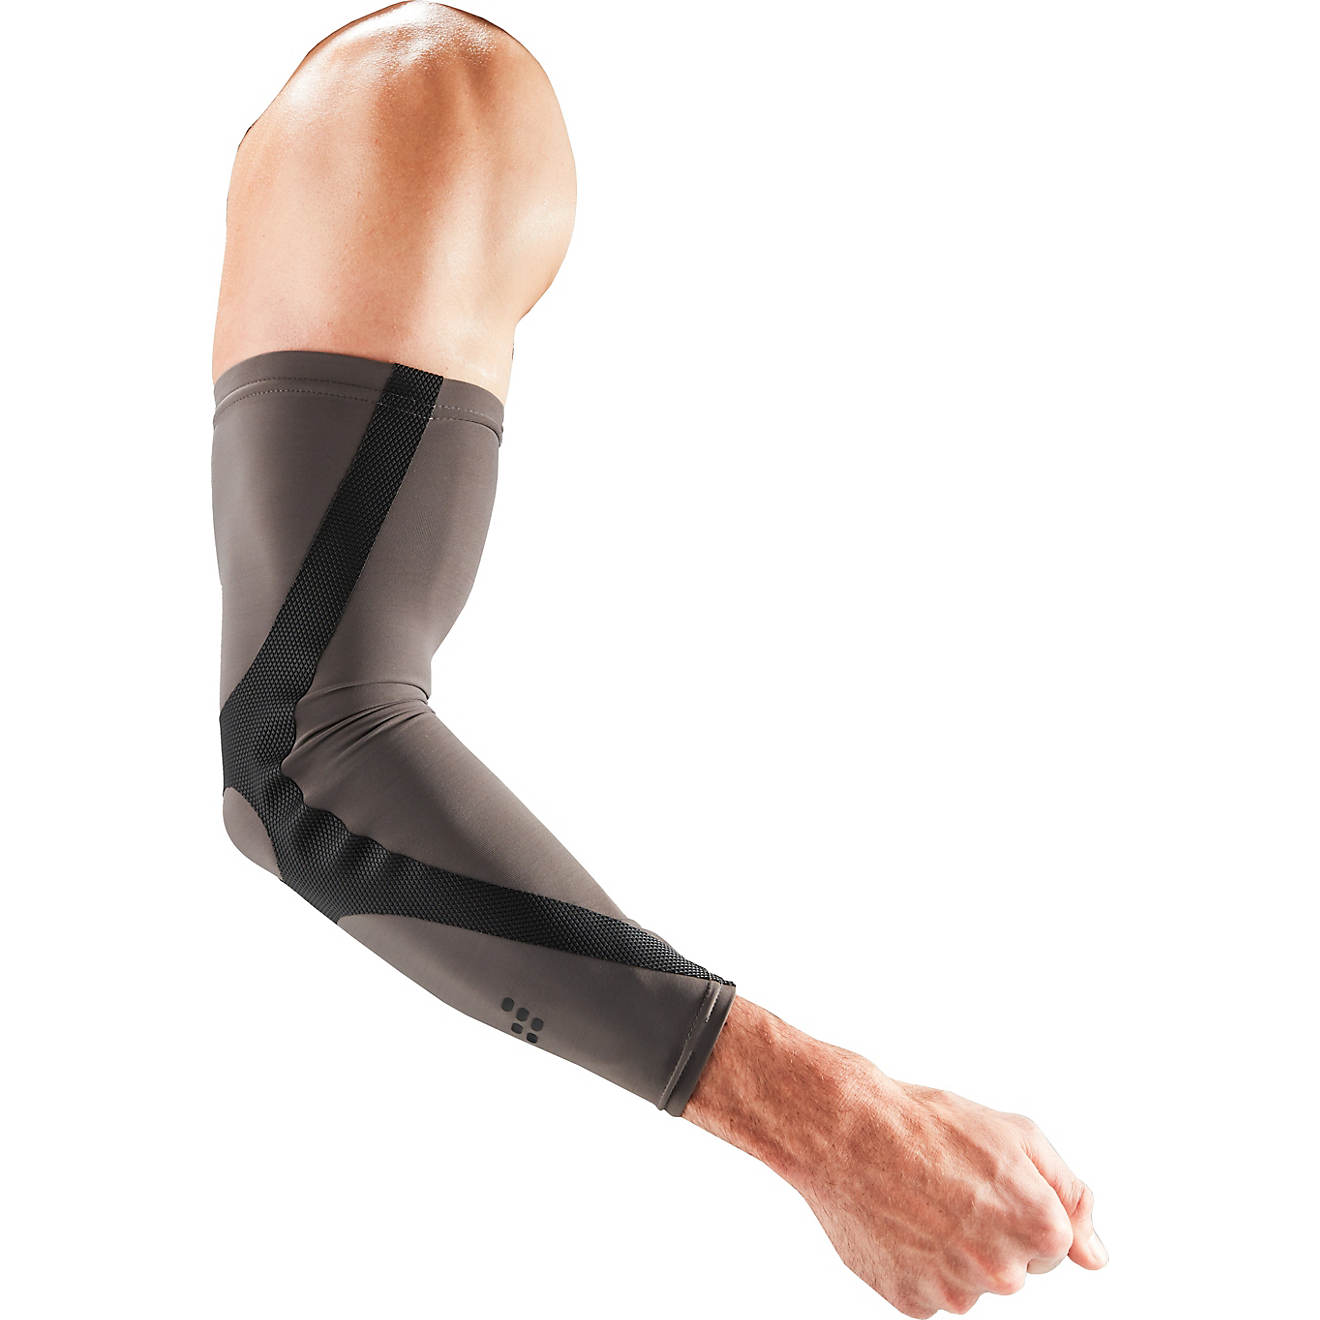 Details about   BCG black Arm Compression brace & support Sleeve,adult size S M or L 